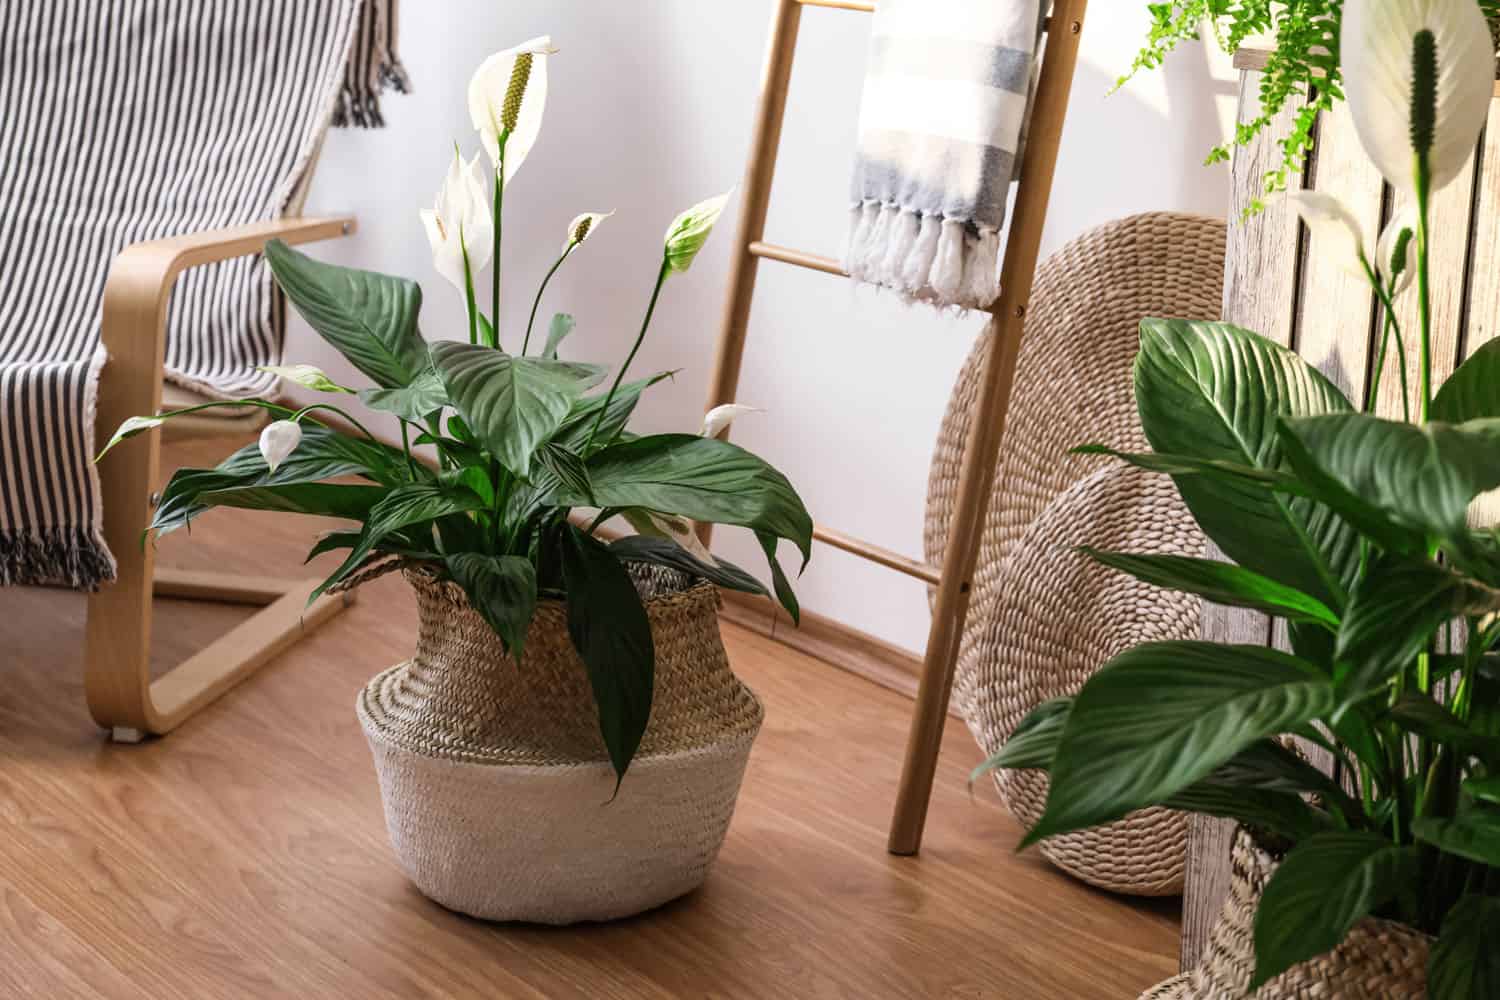 Peace lily plant in a clay cream colored pot